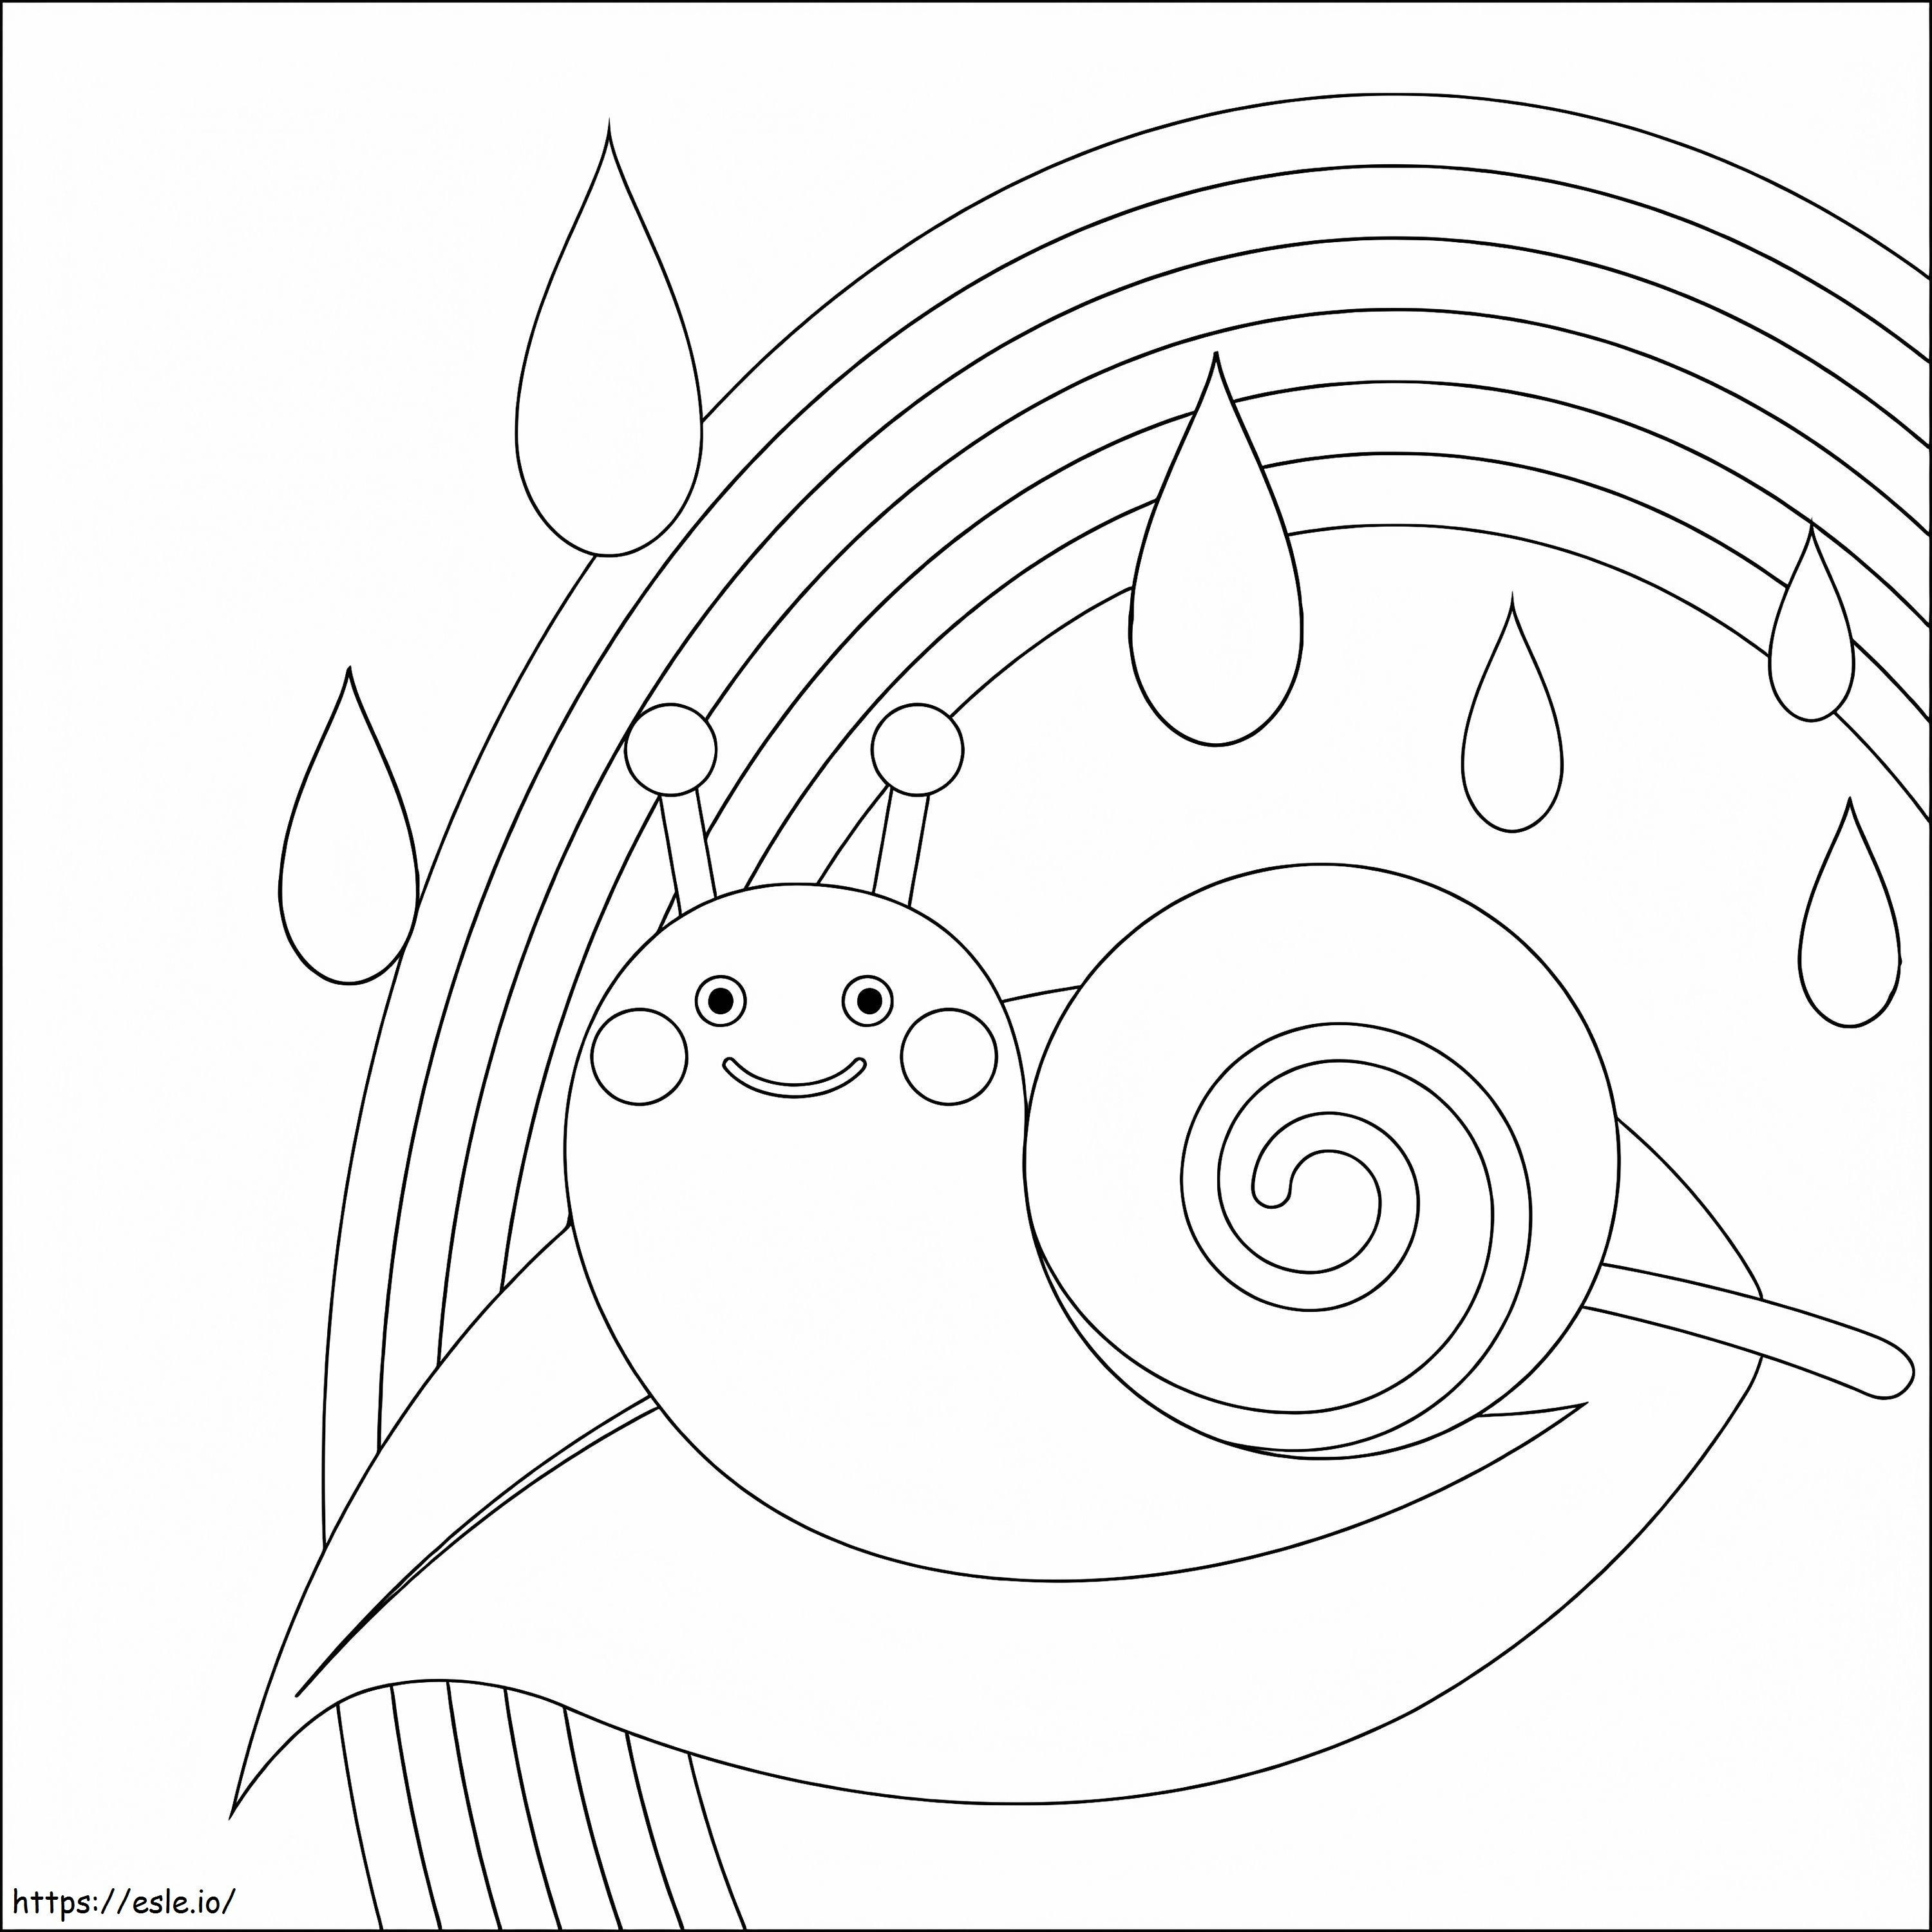 Snail And Rainbow coloring page